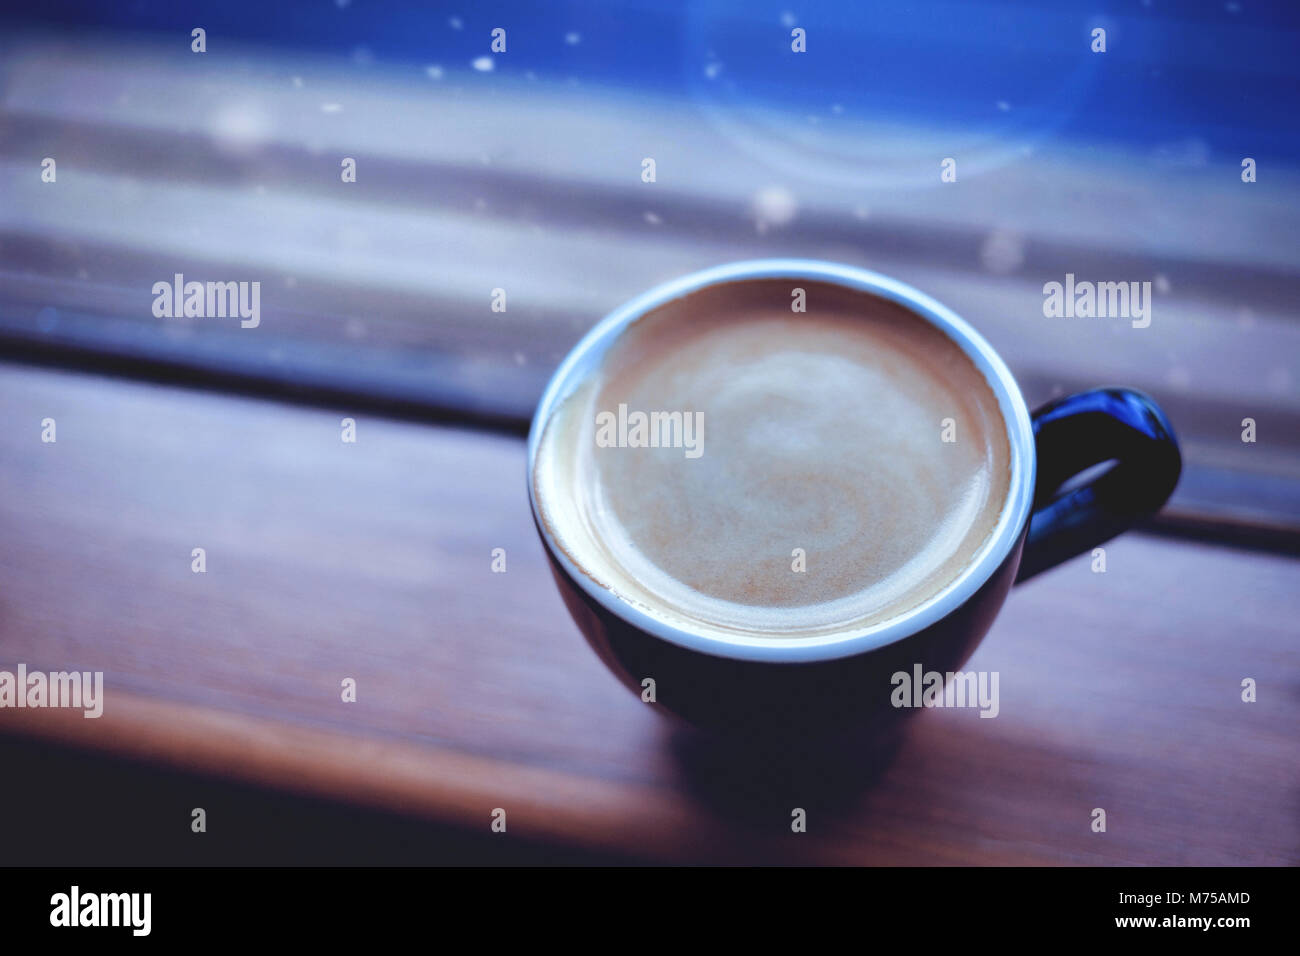 https://c8.alamy.com/comp/M75AMD/americano-coffee-on-a-side-of-the-window-and-snow-falling-in-the-winter-M75AMD.jpg